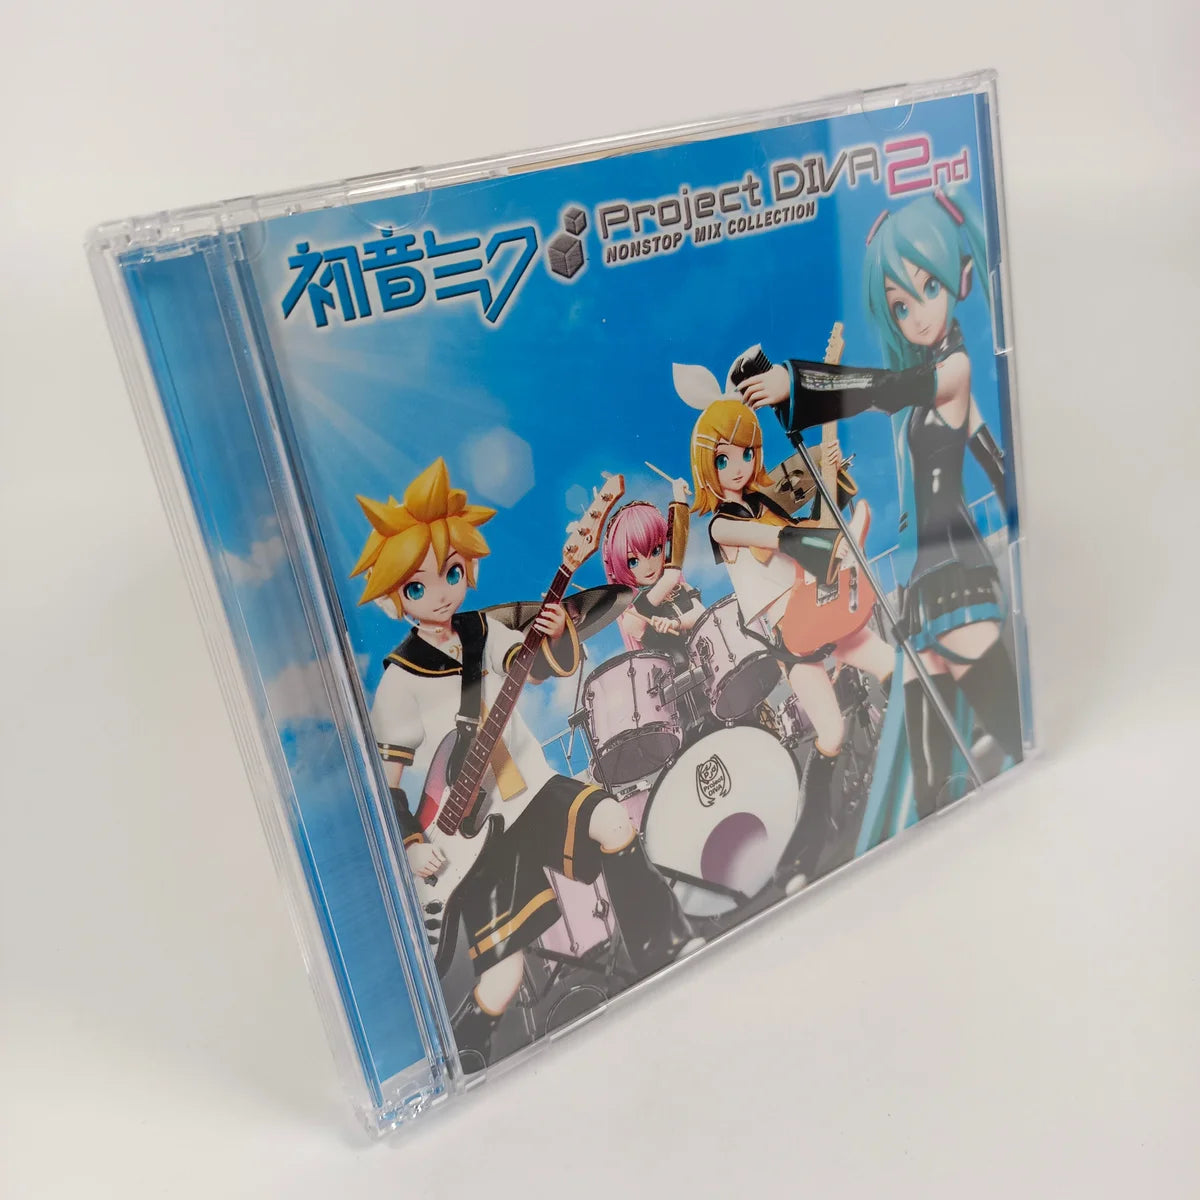 Hatsune Miku Project DIVA-2ND NONSTOP MIX COLLECTION